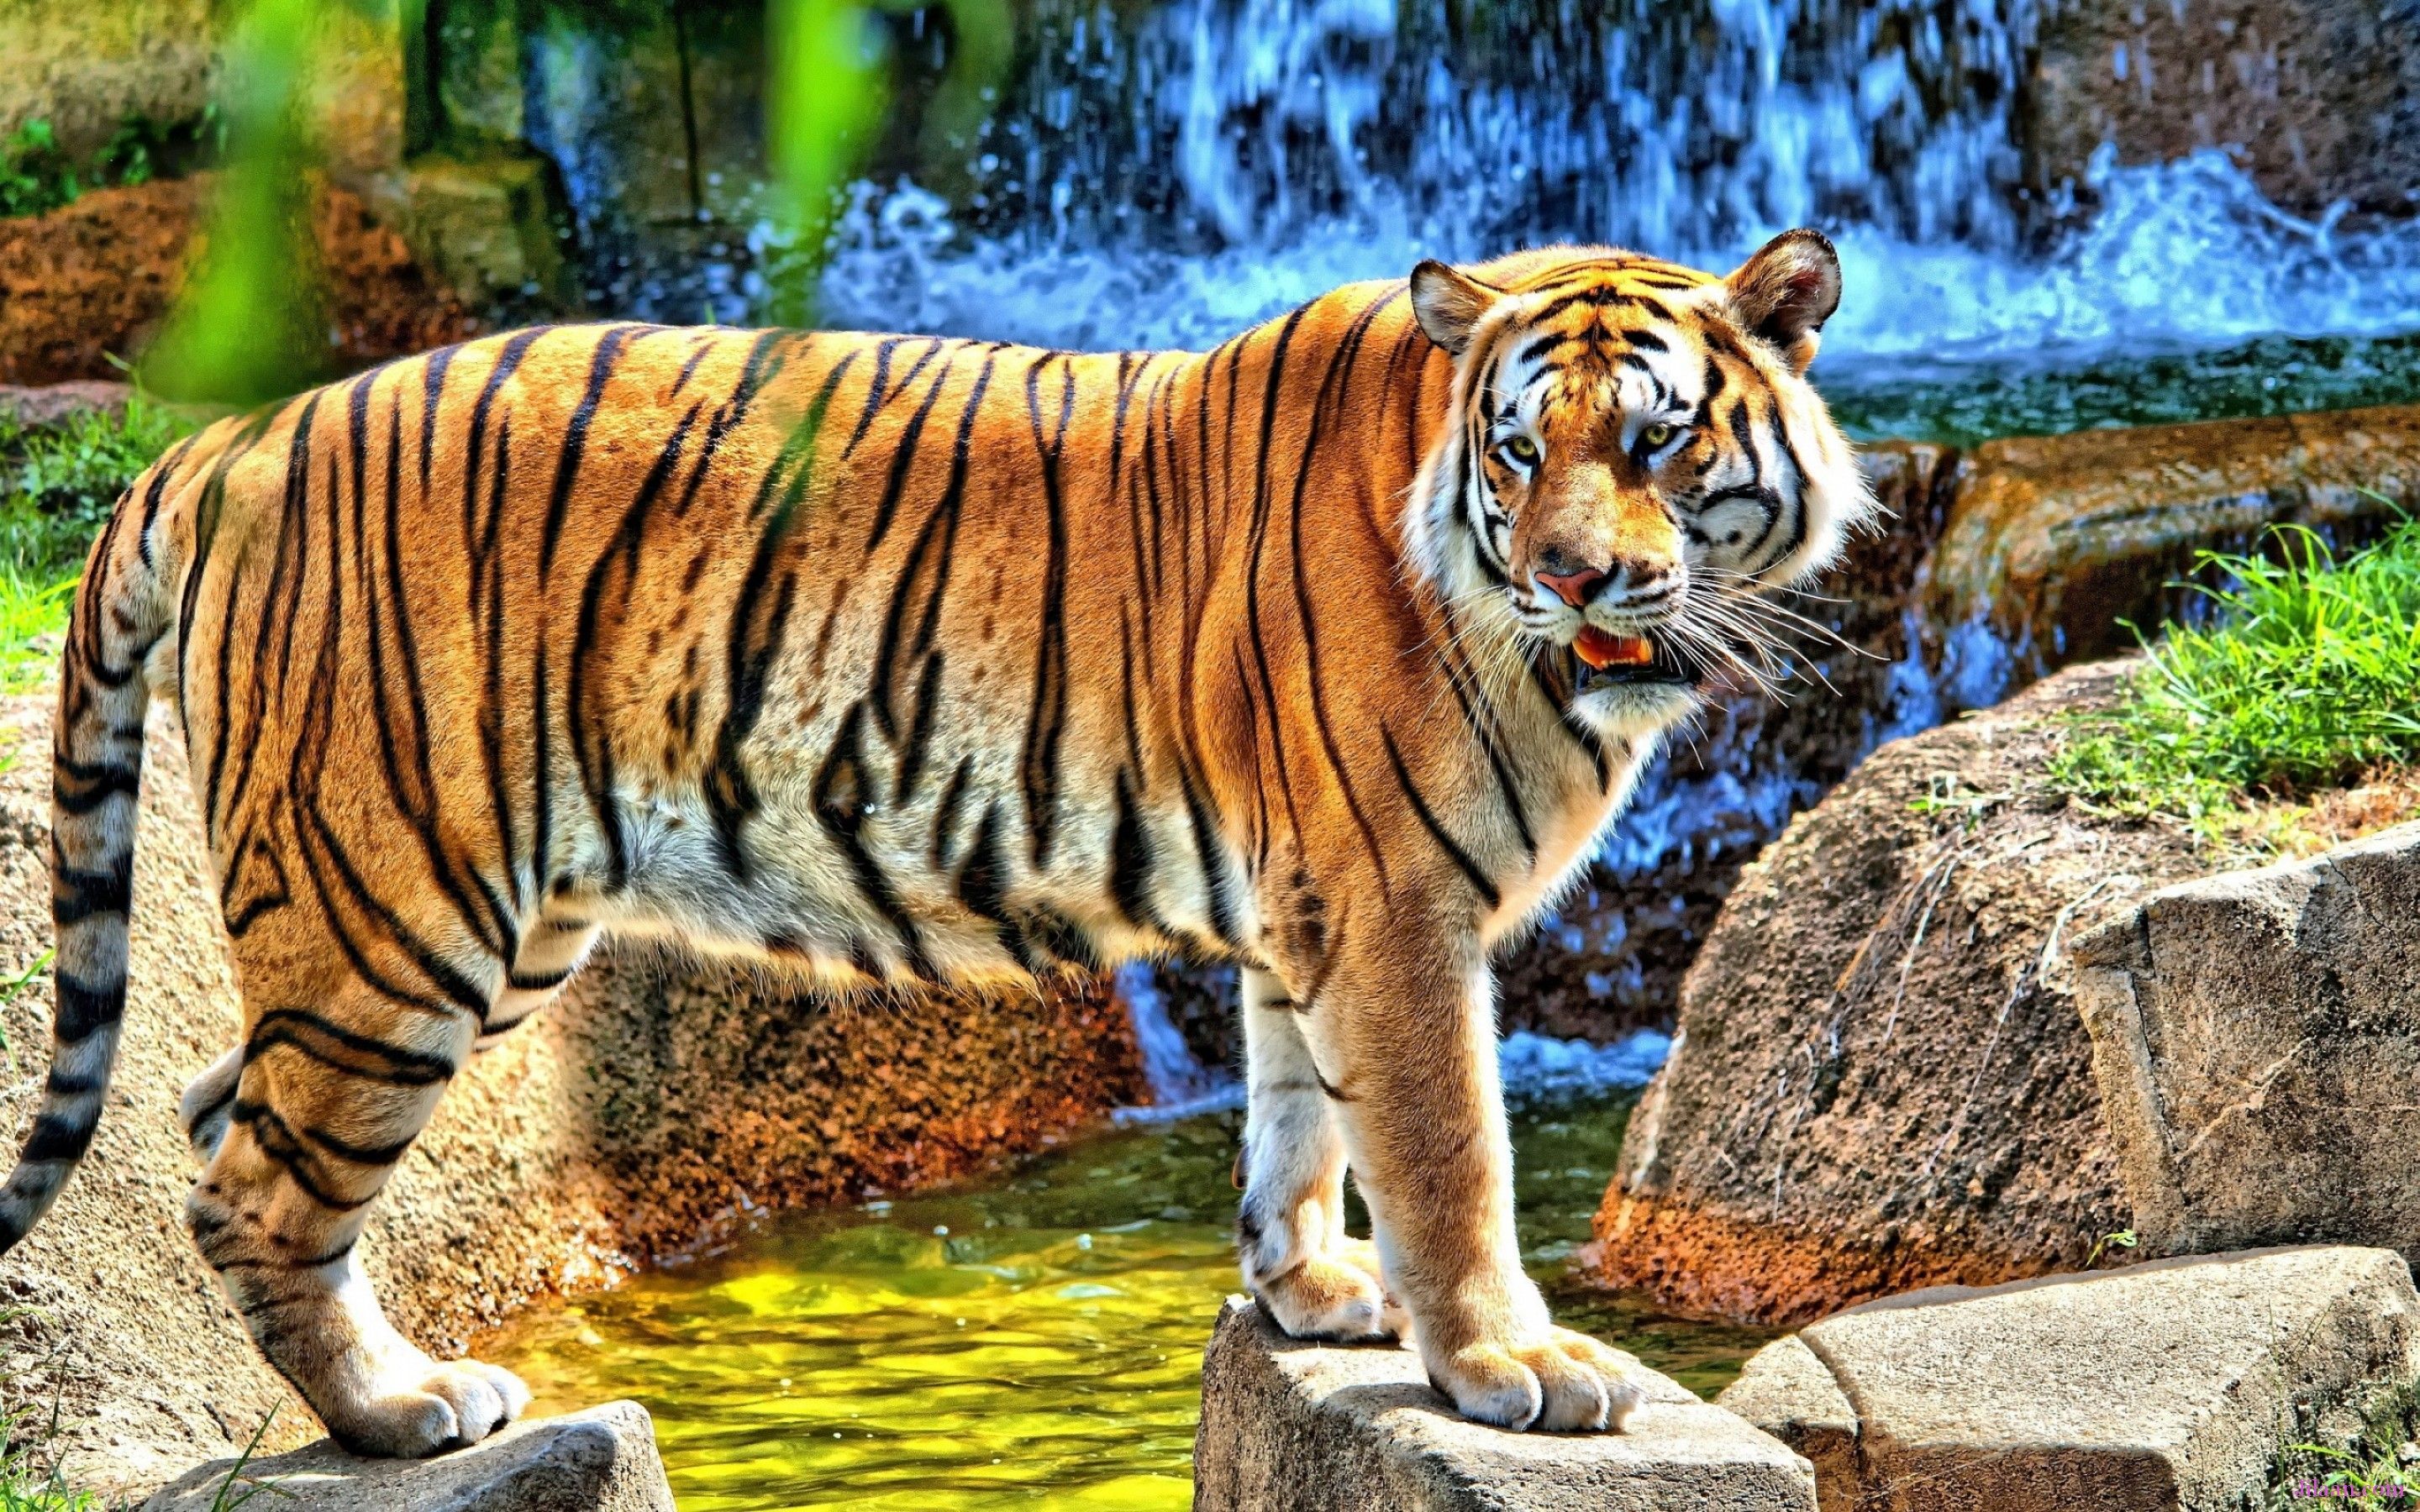 Tiger Full HD 1080p Wallpapers | HD Wallpapers